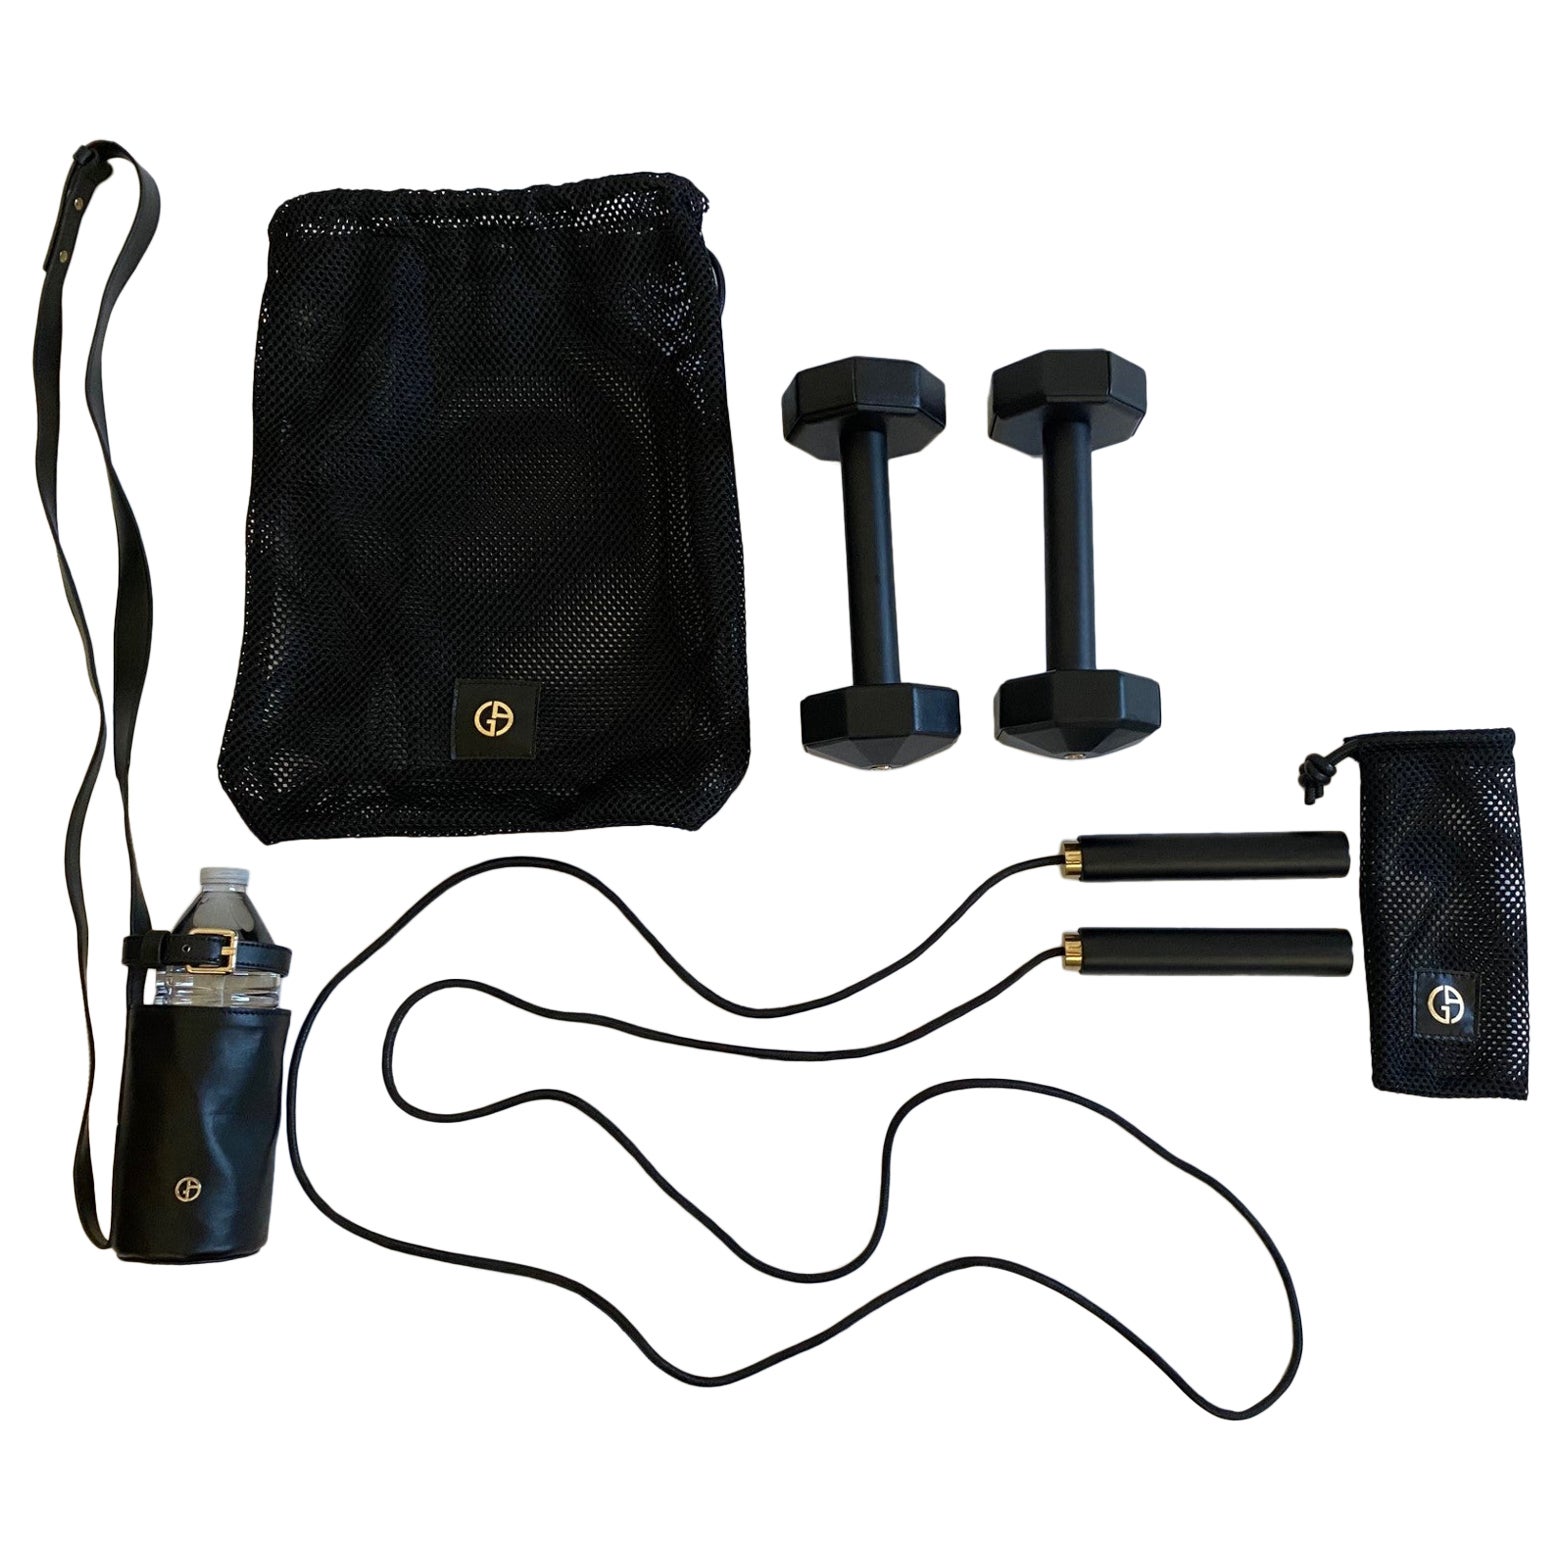 Armani Casa Pump Workout Luxury Set Made in Italy For Sale